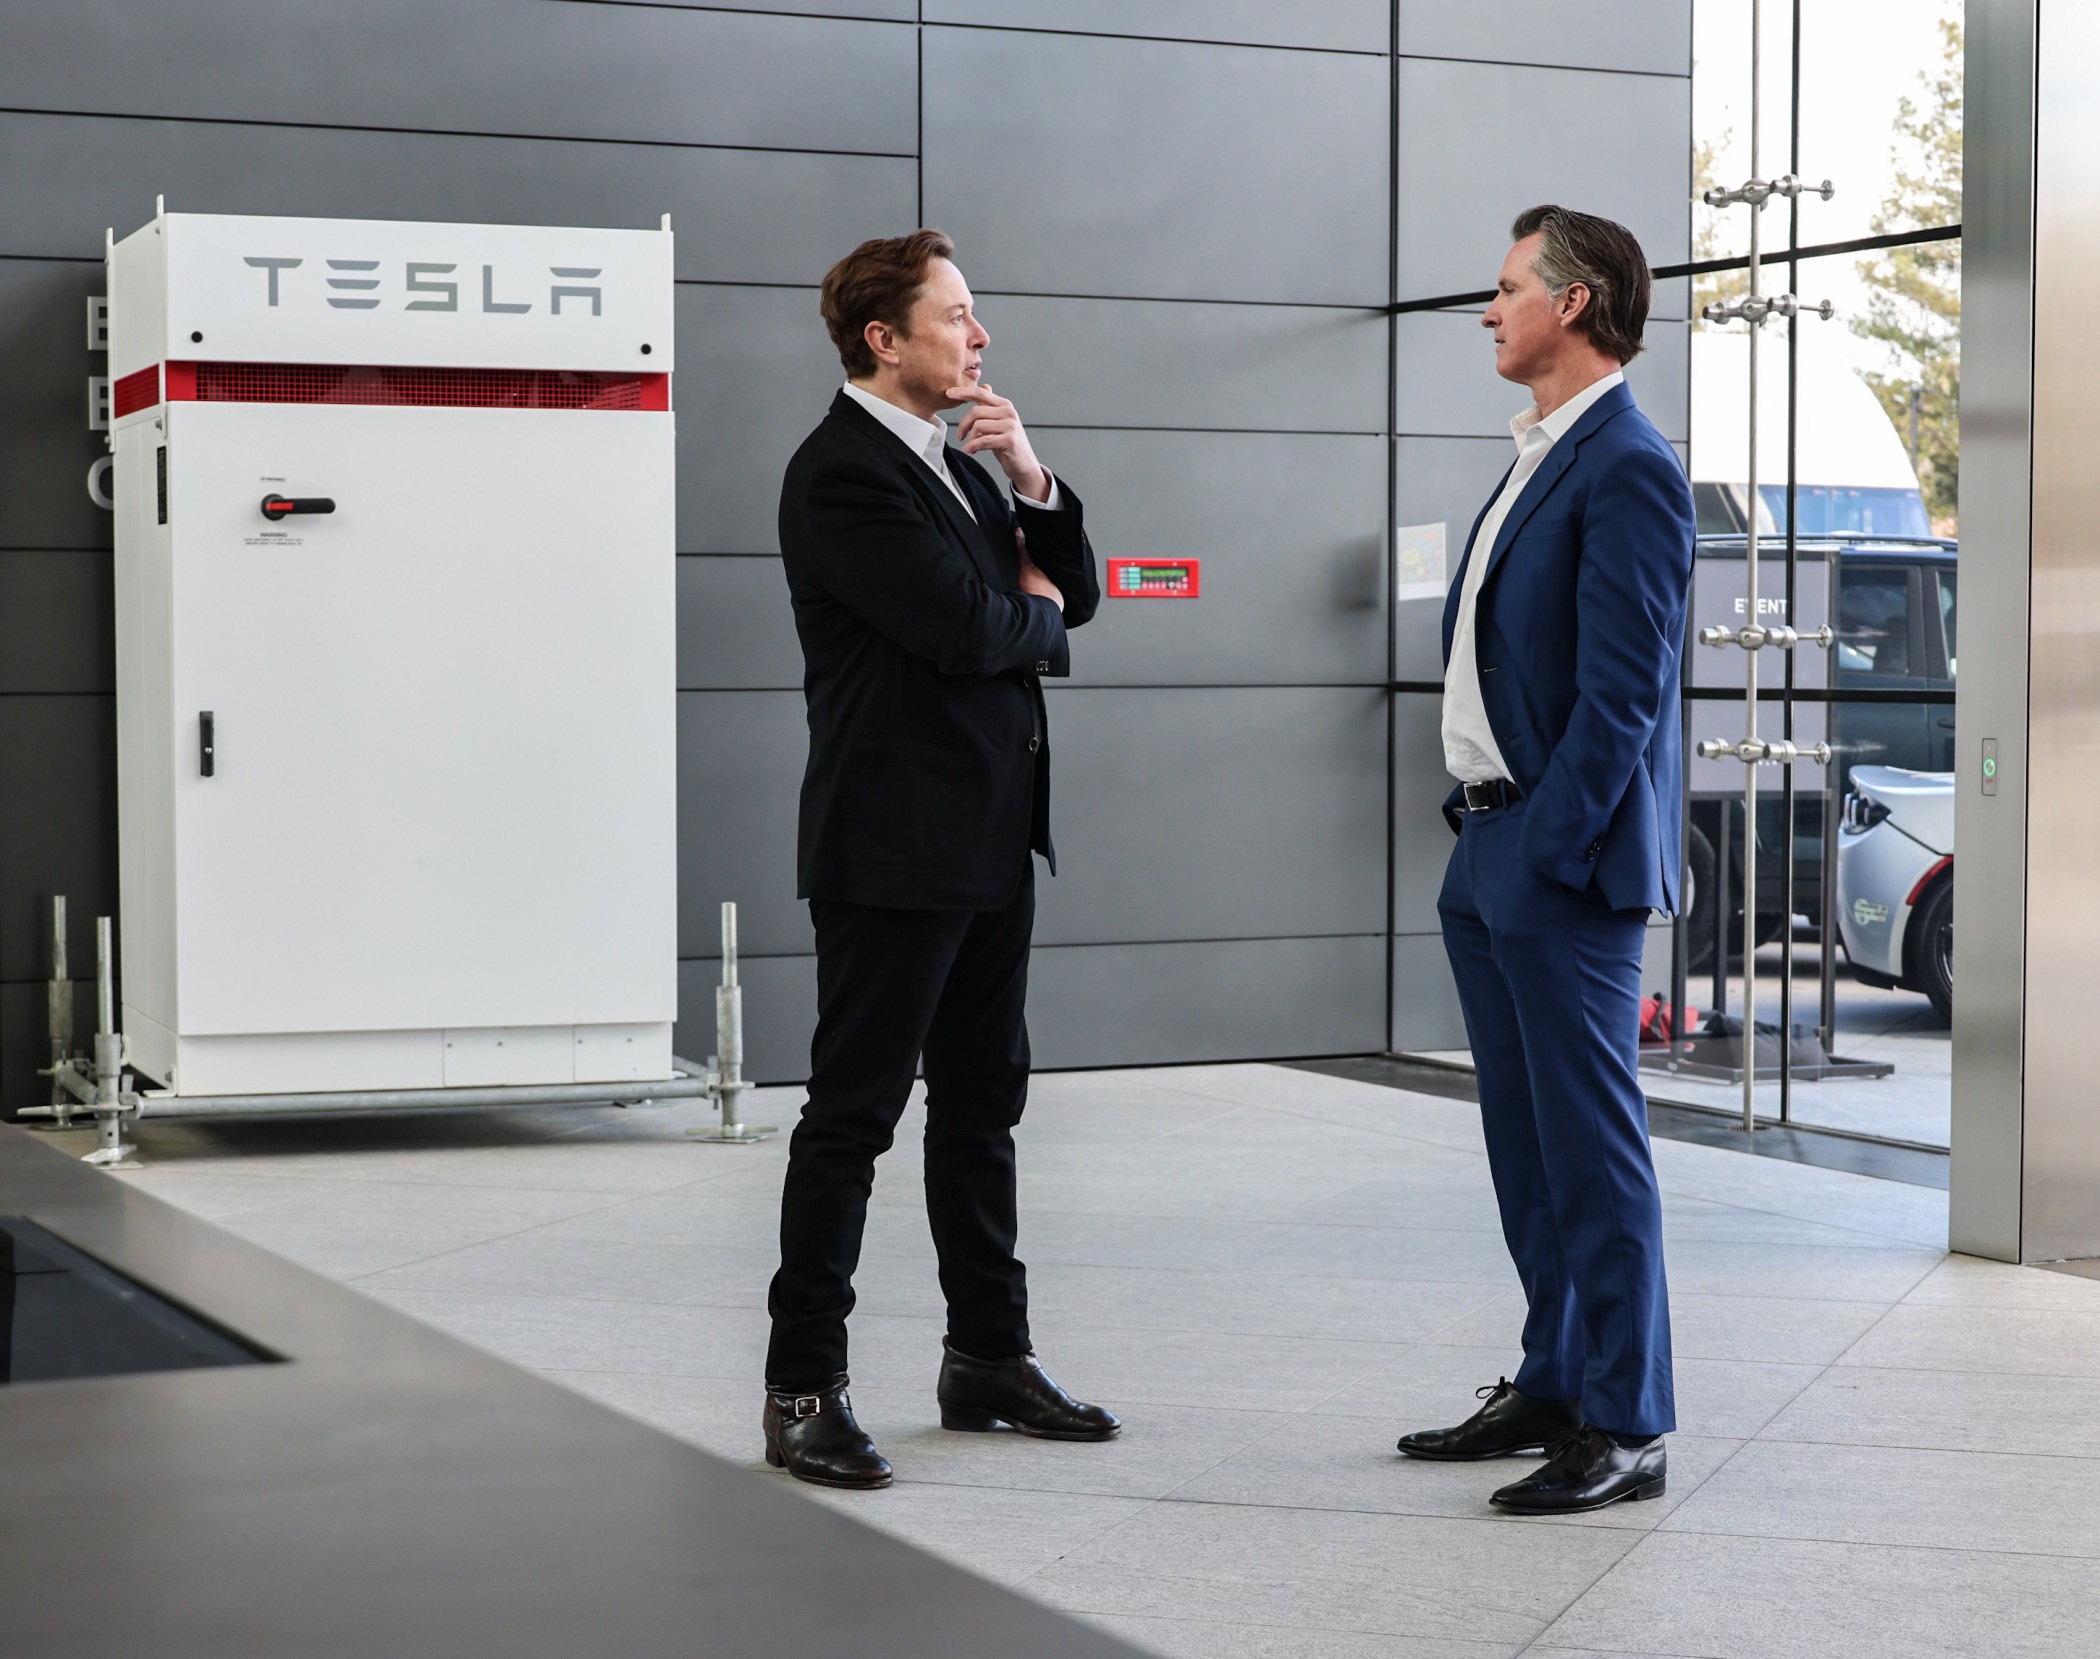 Tesla CEO Elon Musk, left, and California Gov. Gavin Newsom at Tesla's new headquarters for its global engineering and AI operations in Palo Alto, California. (California Governor's Office)